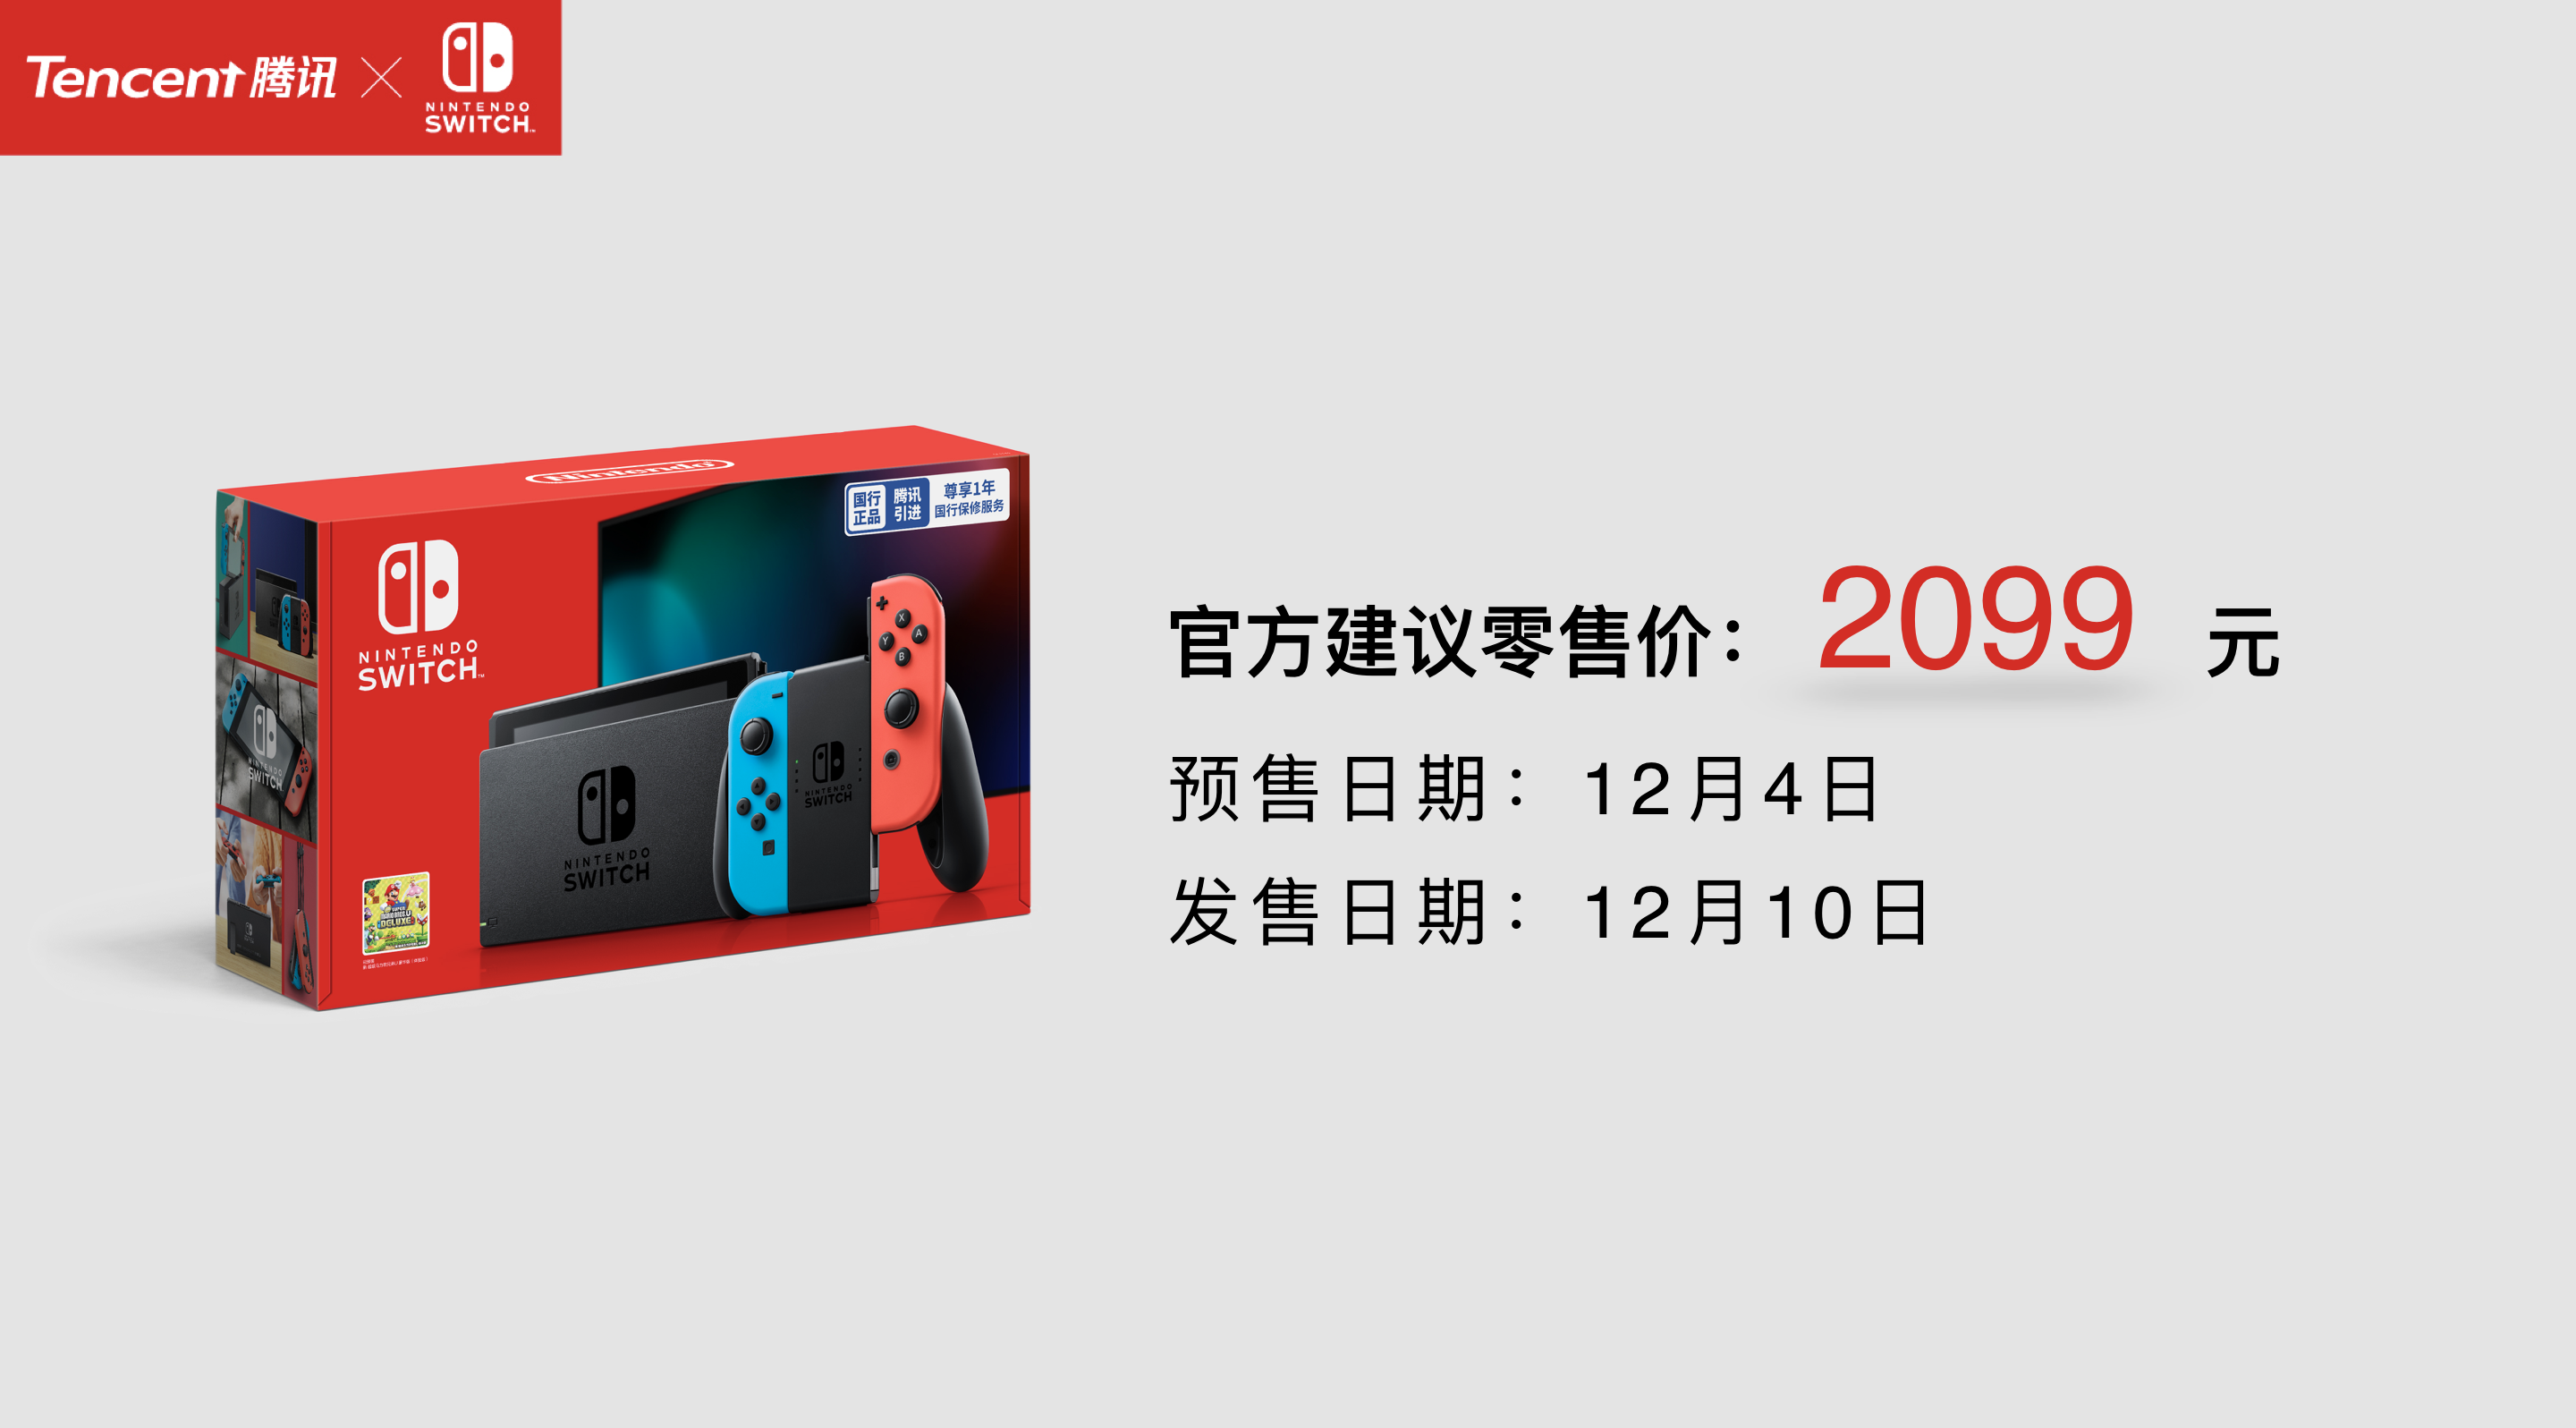 tencent-nintendo-switch-price.png